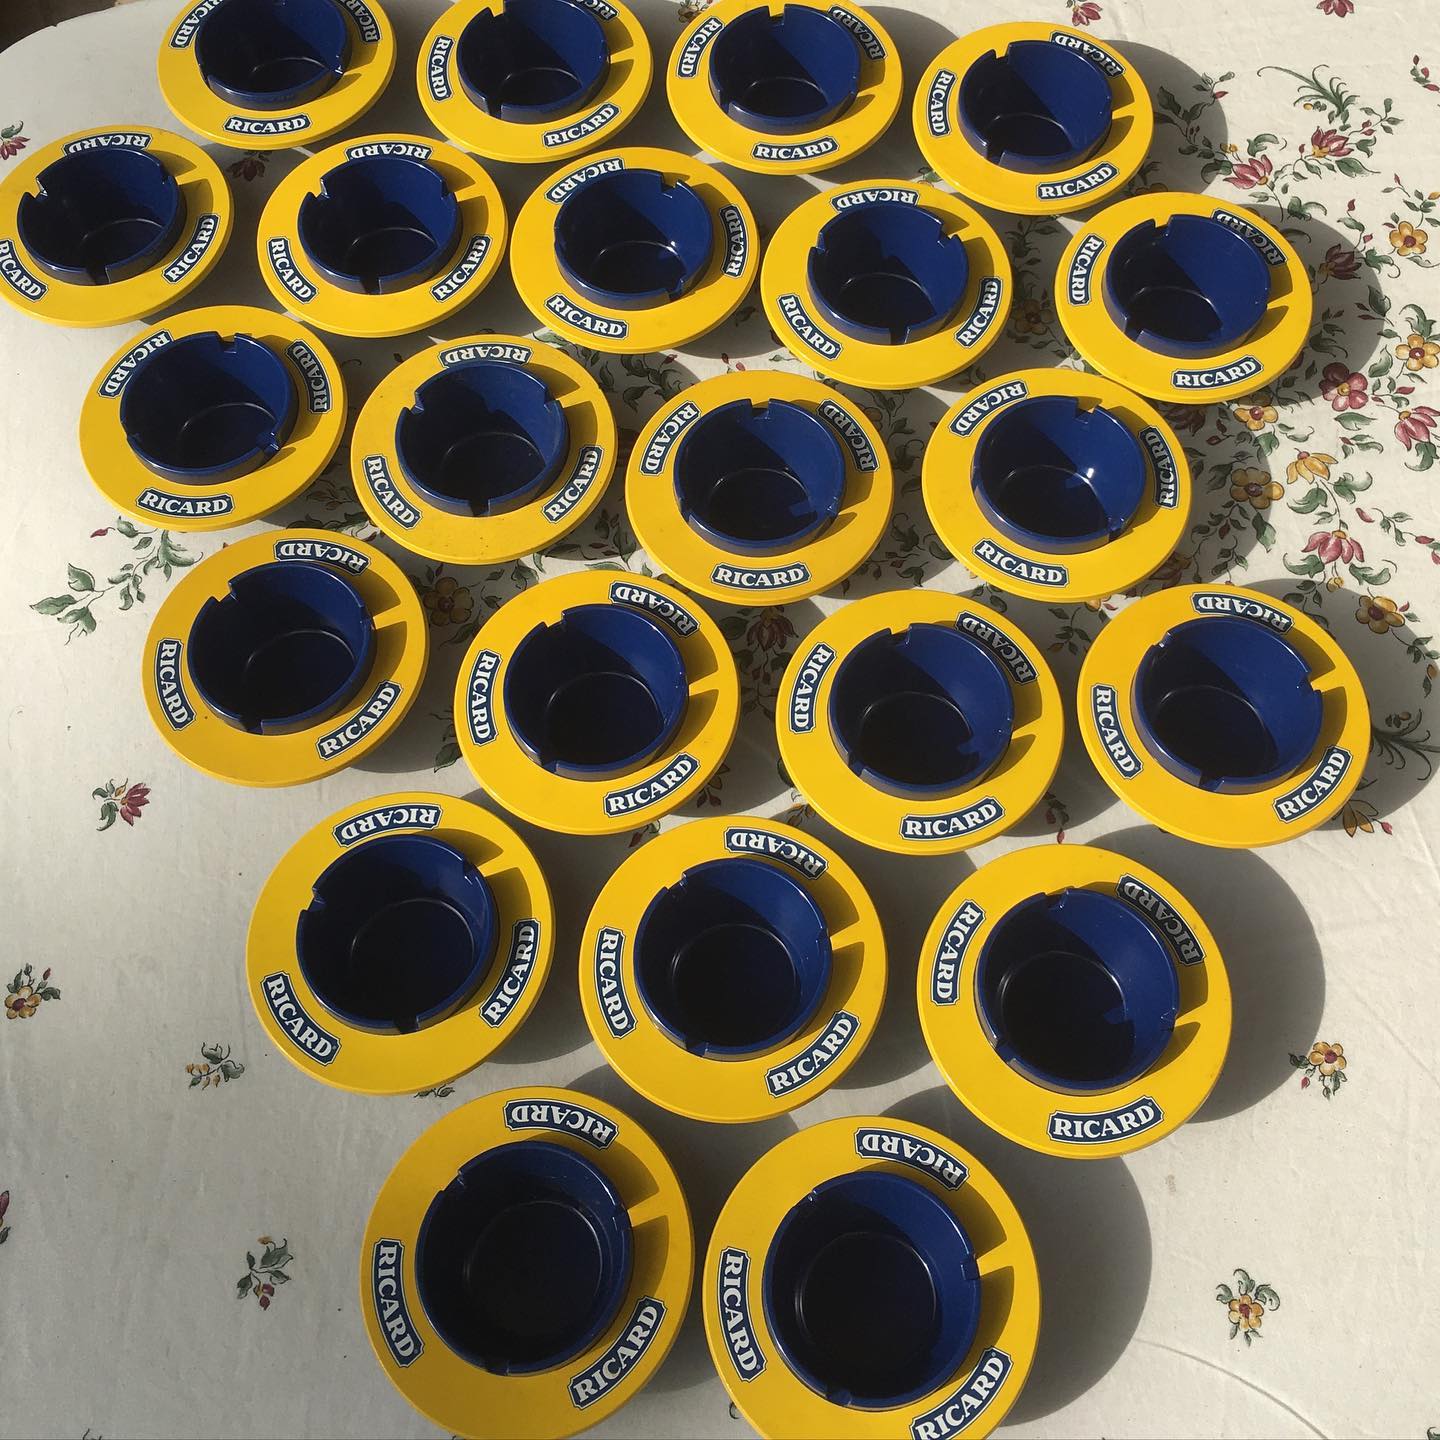 I’m the owner of a lot of #ricard ashtrays. As someone who doesn’t drink Ricard and has never smoked in his life this is an odd thing. They’re going on #leboncoin #ravieres